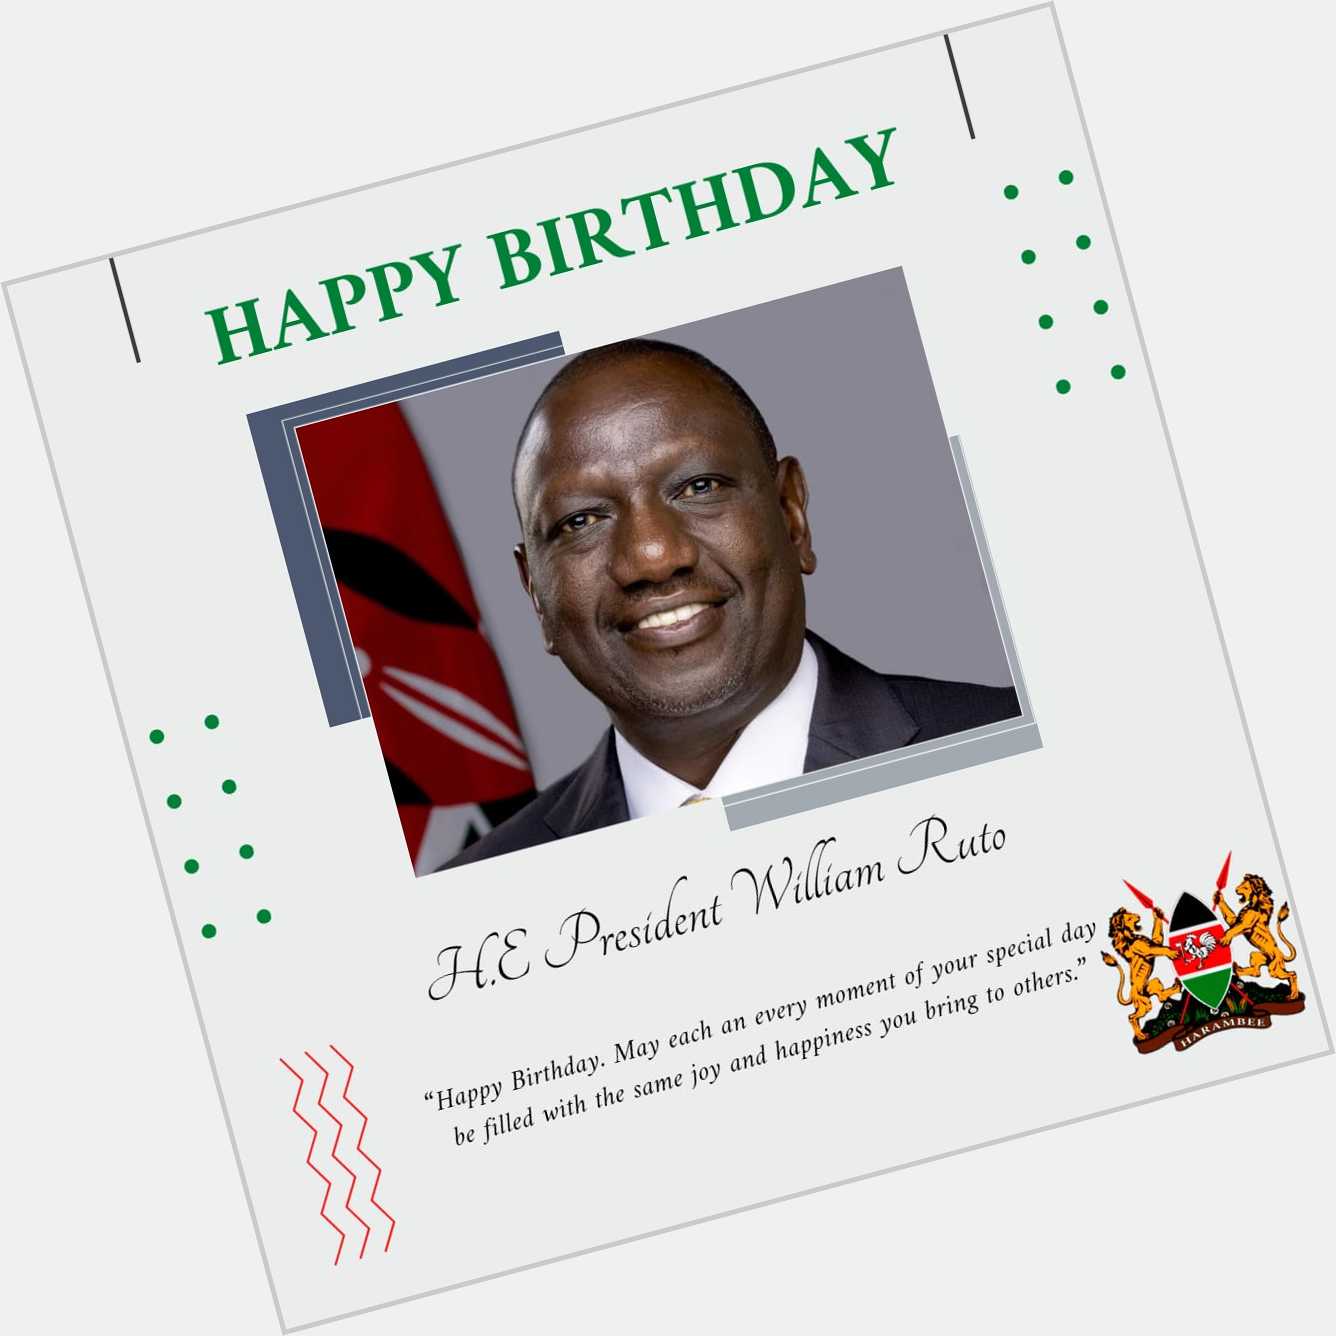 Happy birthday His Excellency ,Dr. William Ruto, the 5th President of the Republic of Kenya. 